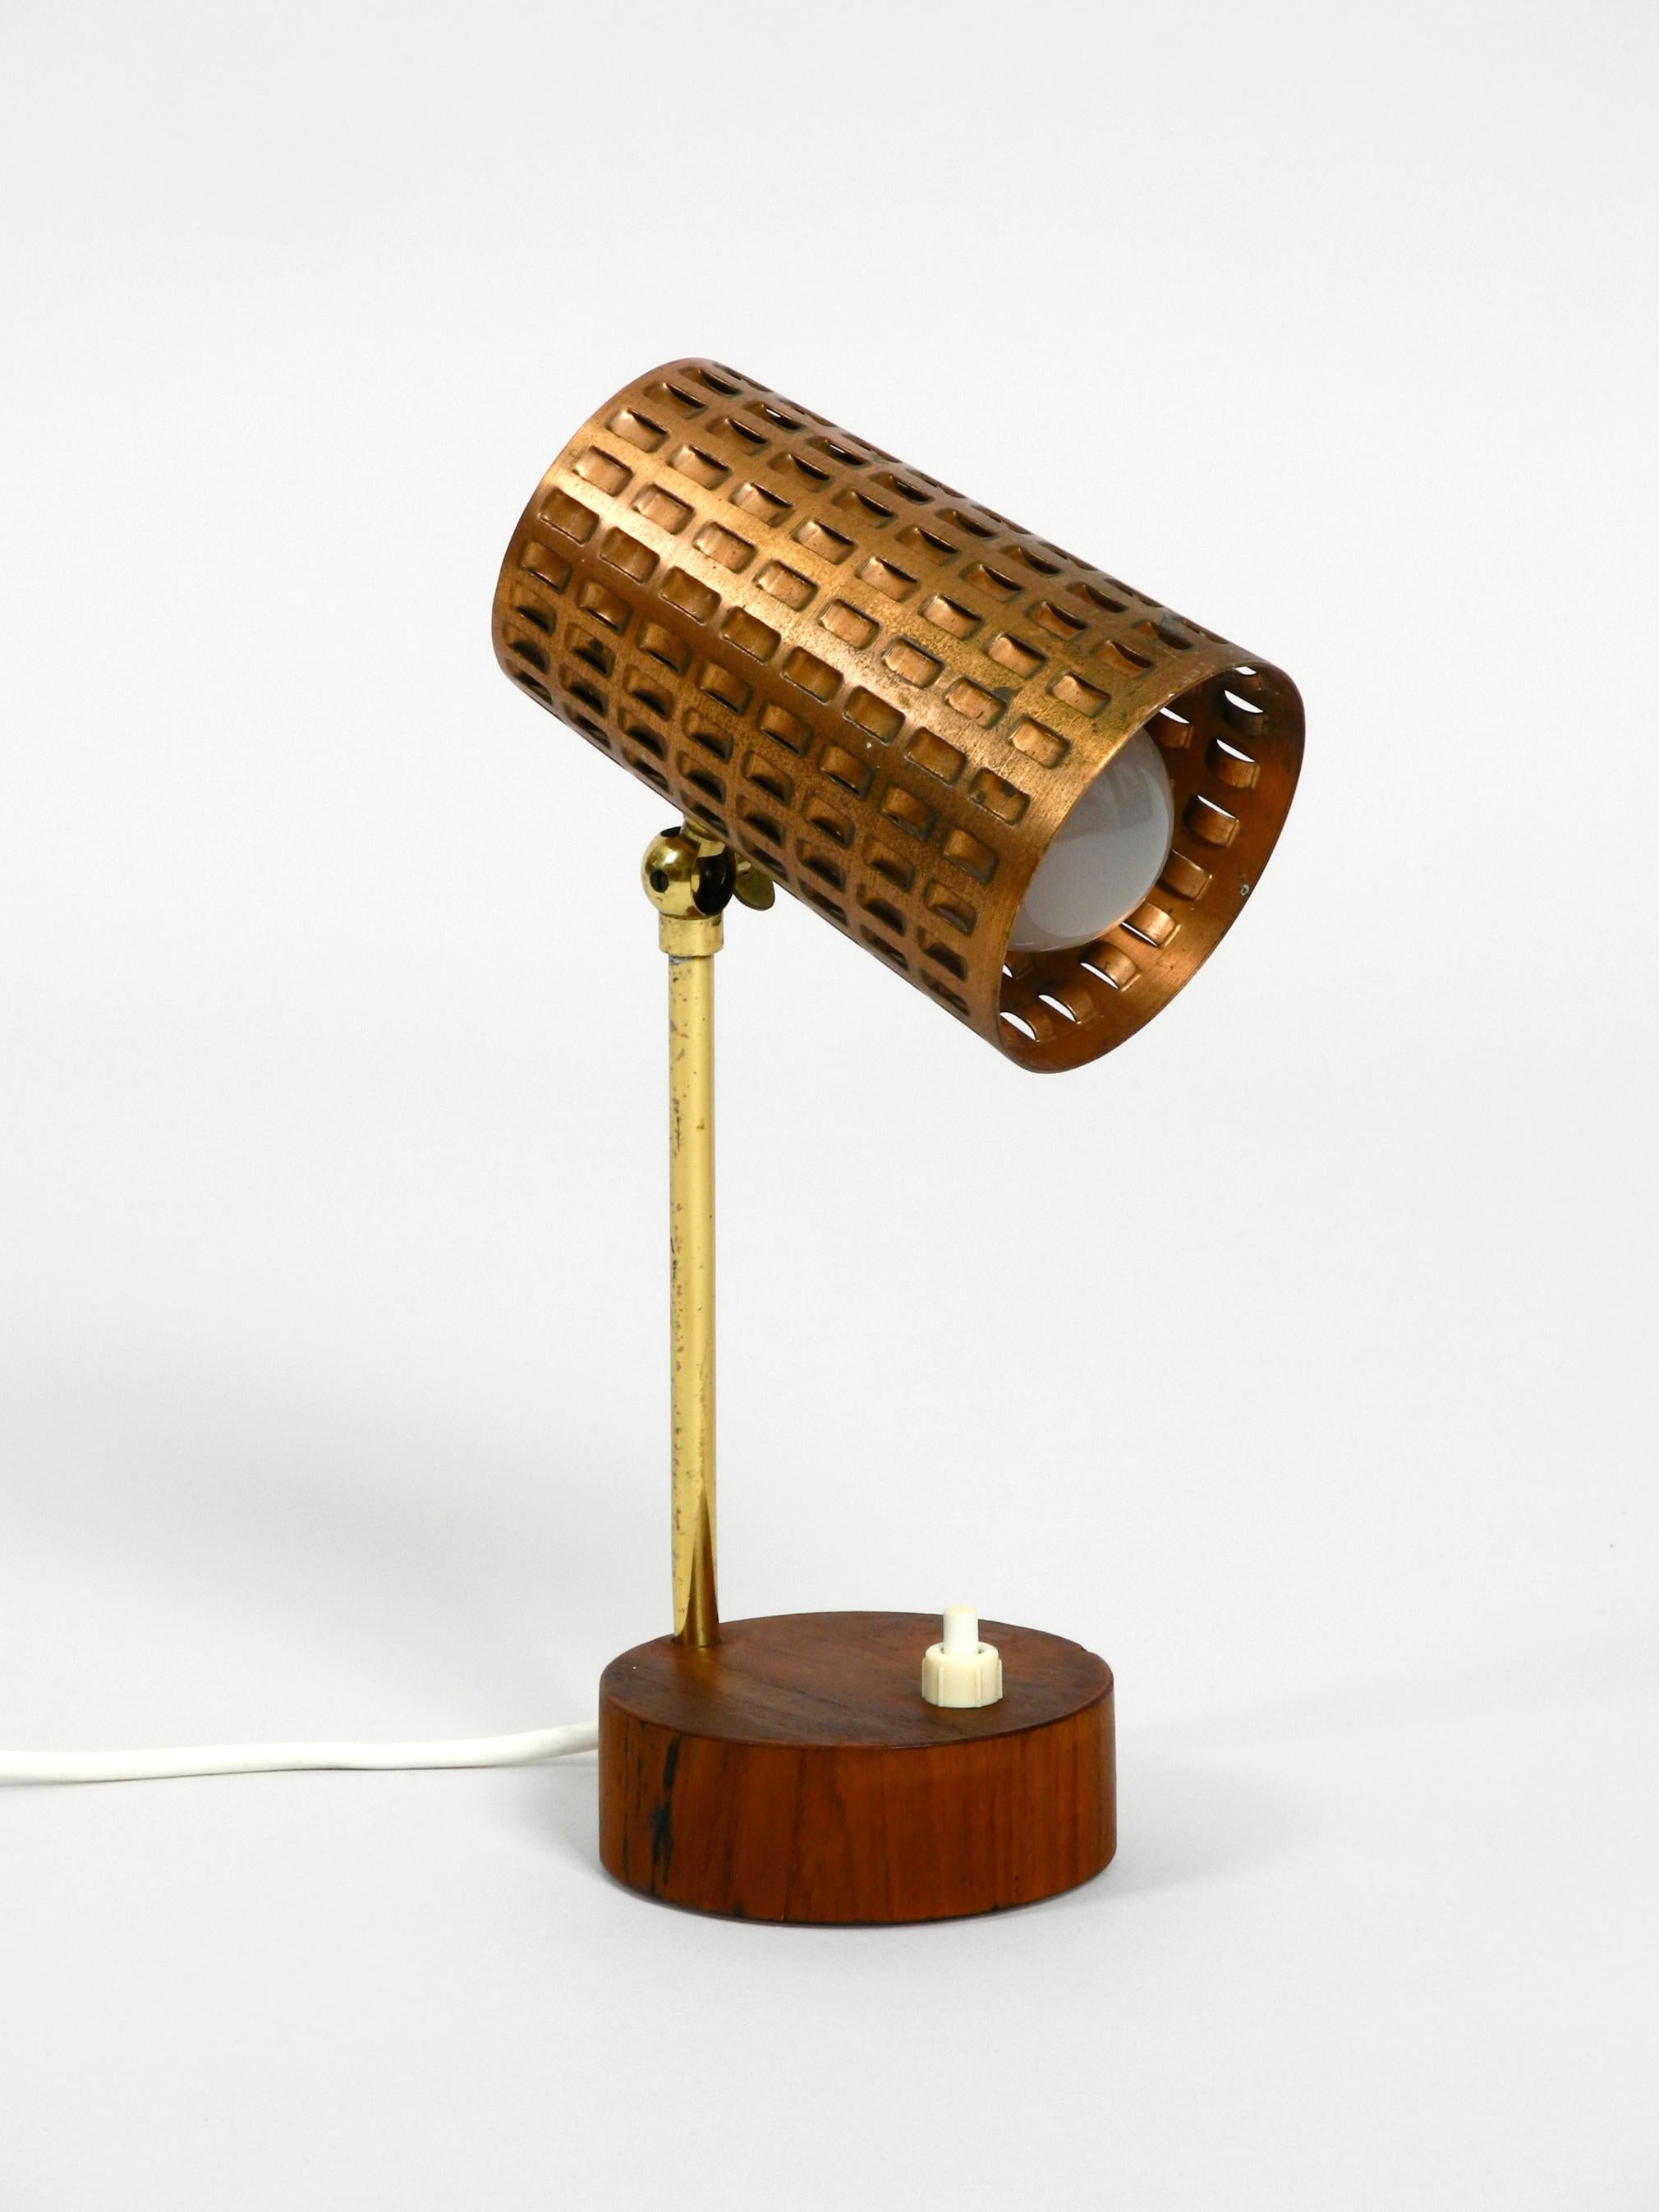 Beautiful Midcentury Table Lamp with Perforated Copper Shade and Teak Wood Base 7